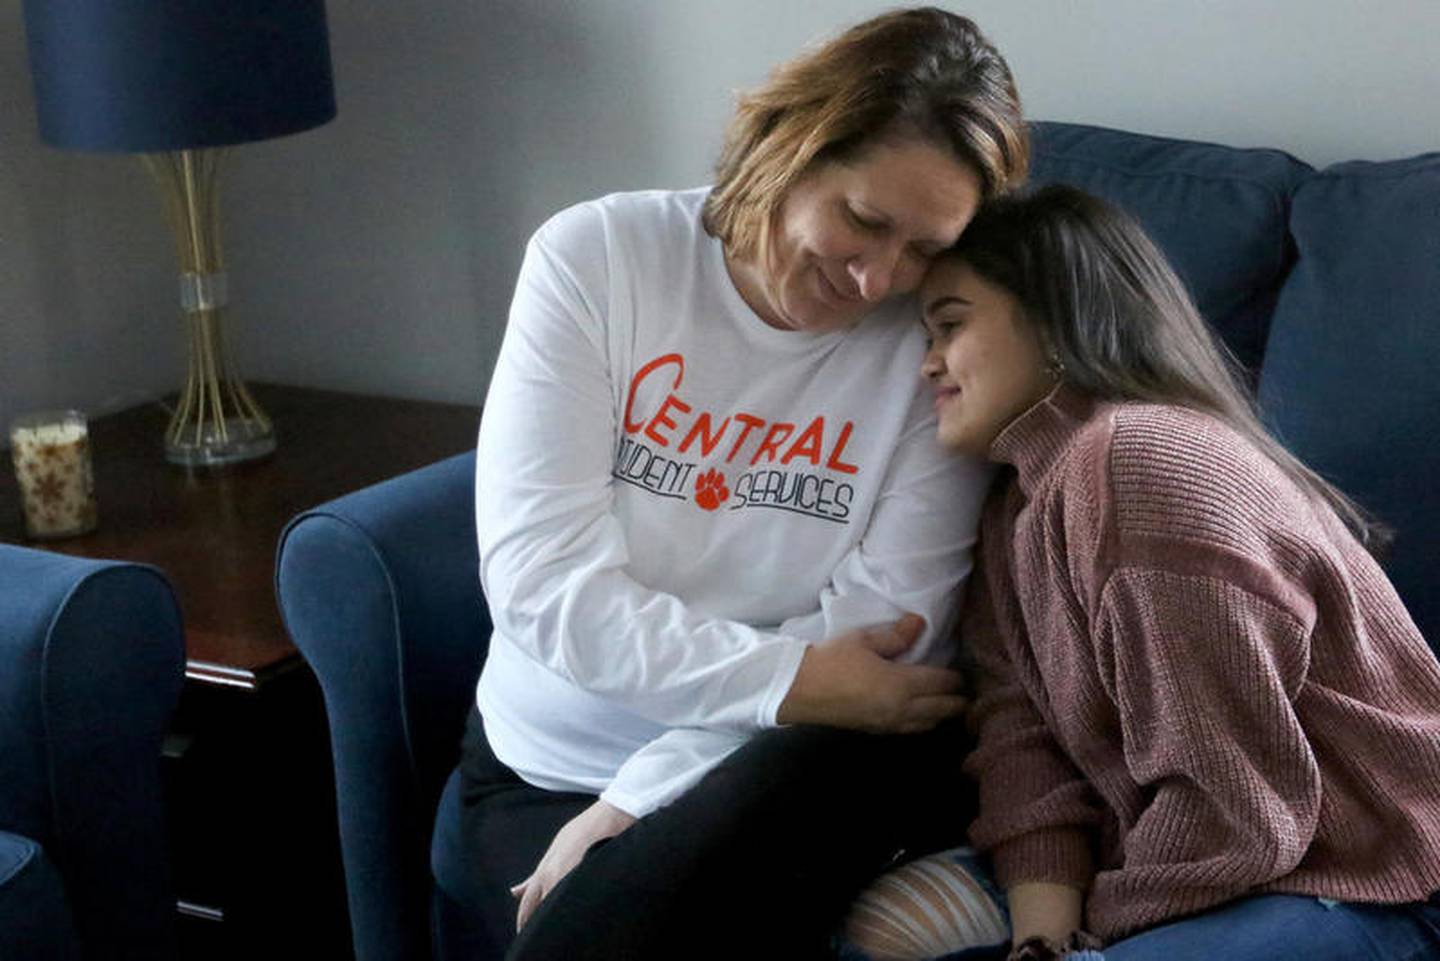 Meydi Guzman rests her head on the shoulder of her school counselor, Sara Huser, on Friday, Feb. 28, 2020 in Crystal Lake.   Guzman, who was recently released from ICE detention, is staying temporarily with Huser, who fought to have her released.